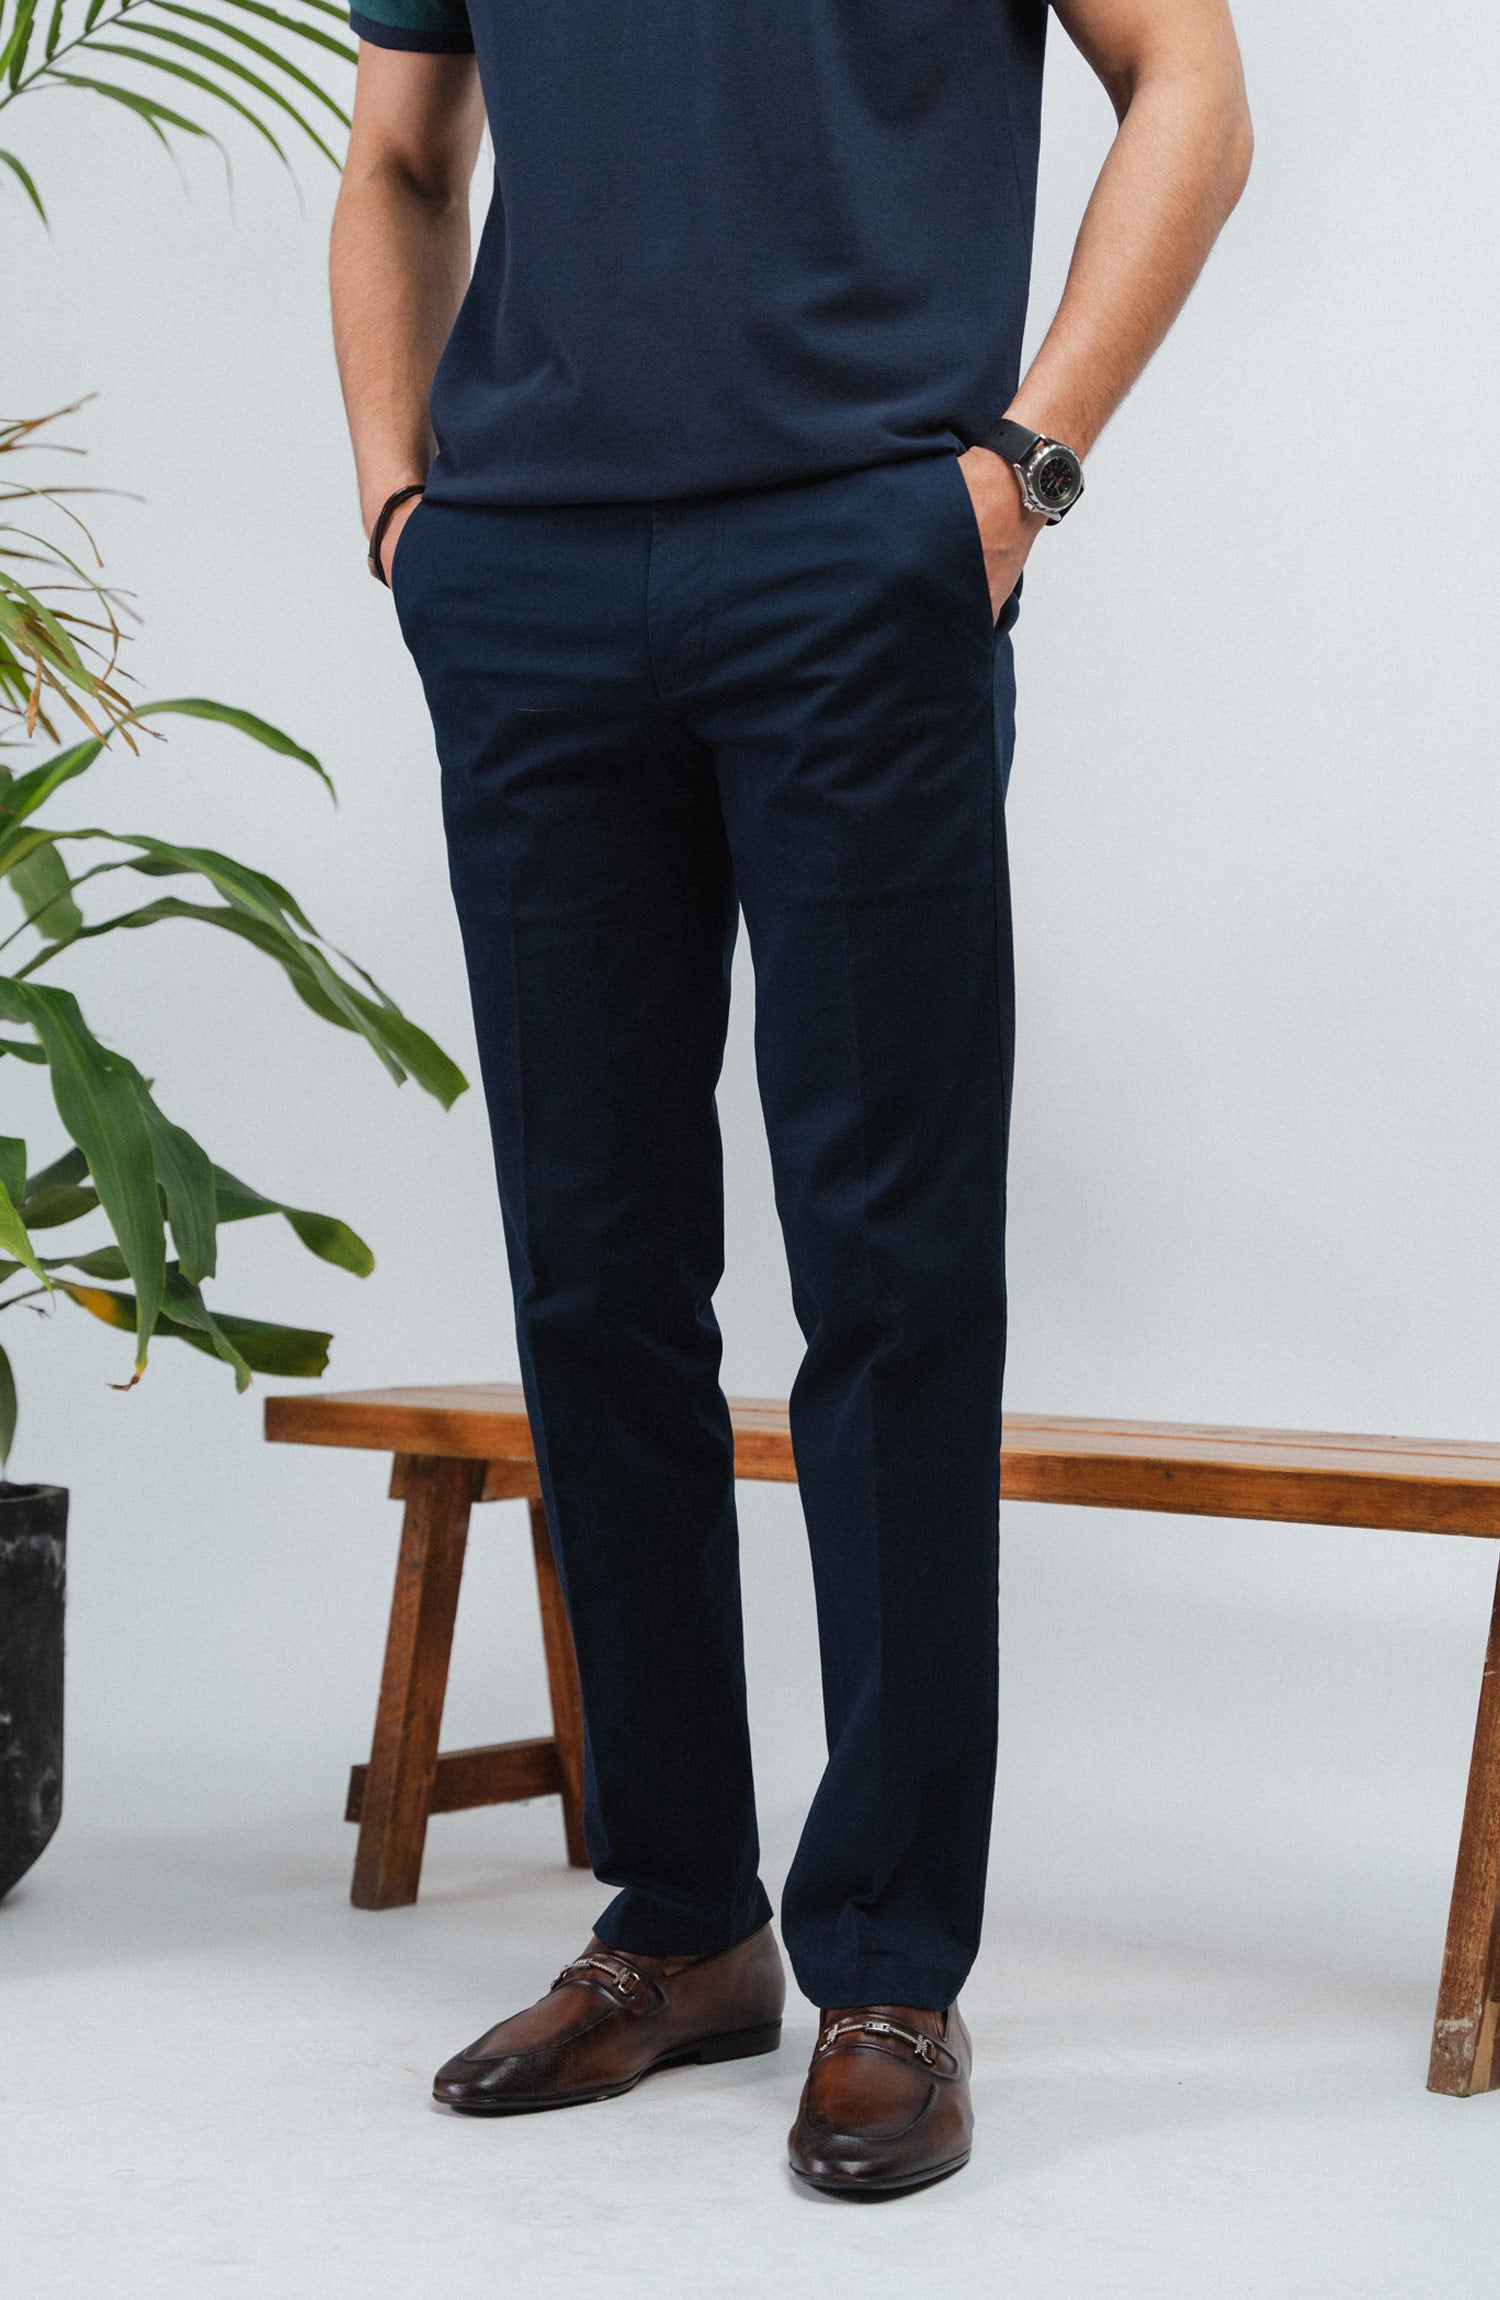 I understand & wish to continue | Mens navy dress pants, Blue outfit men, Navy  blue dress pants